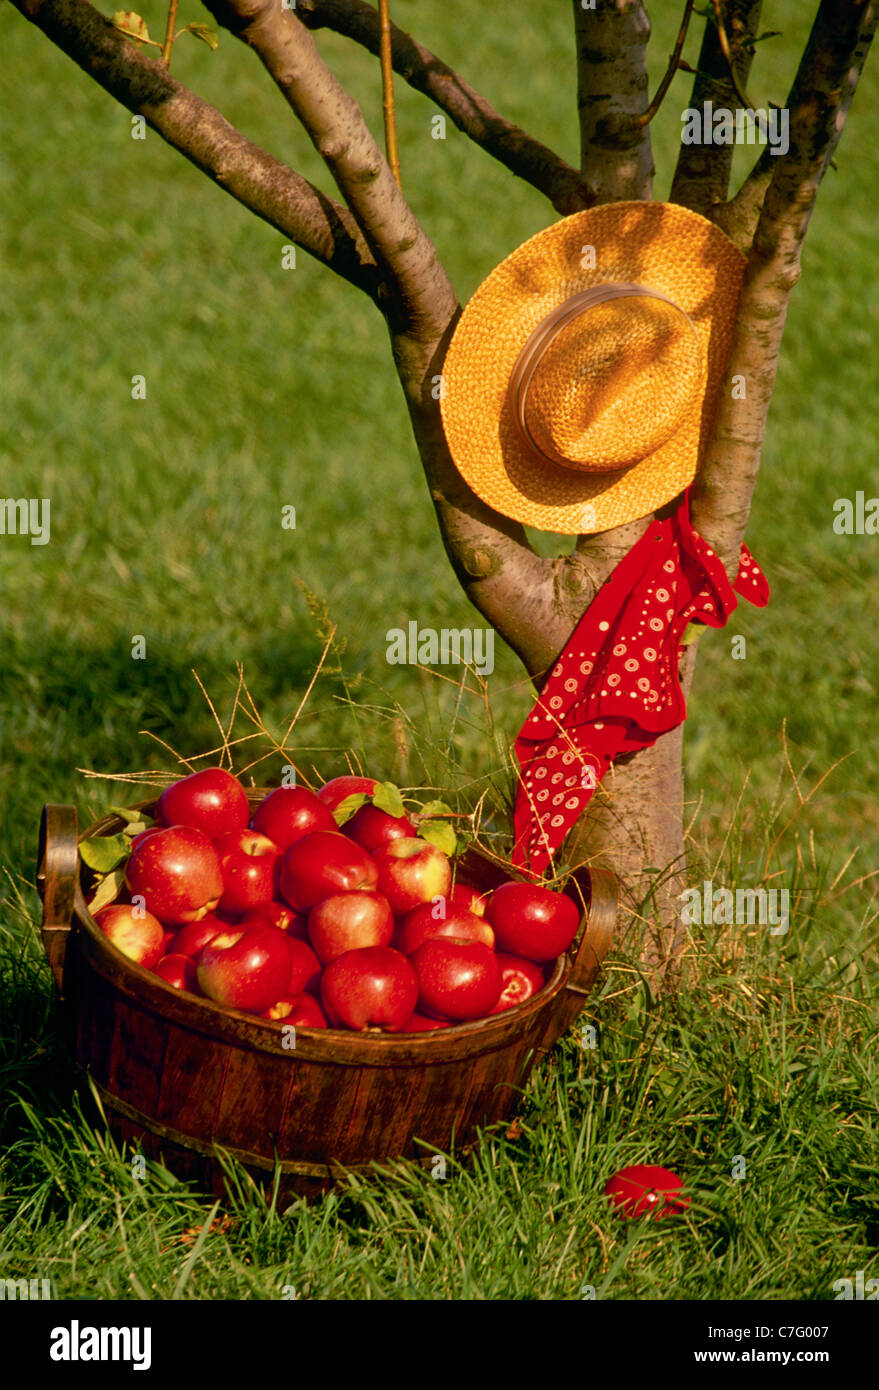 Antique bushel basket filled with fresh ripe winesap apples set beside an apple tree holding a straw hat and bandana Stock Photo